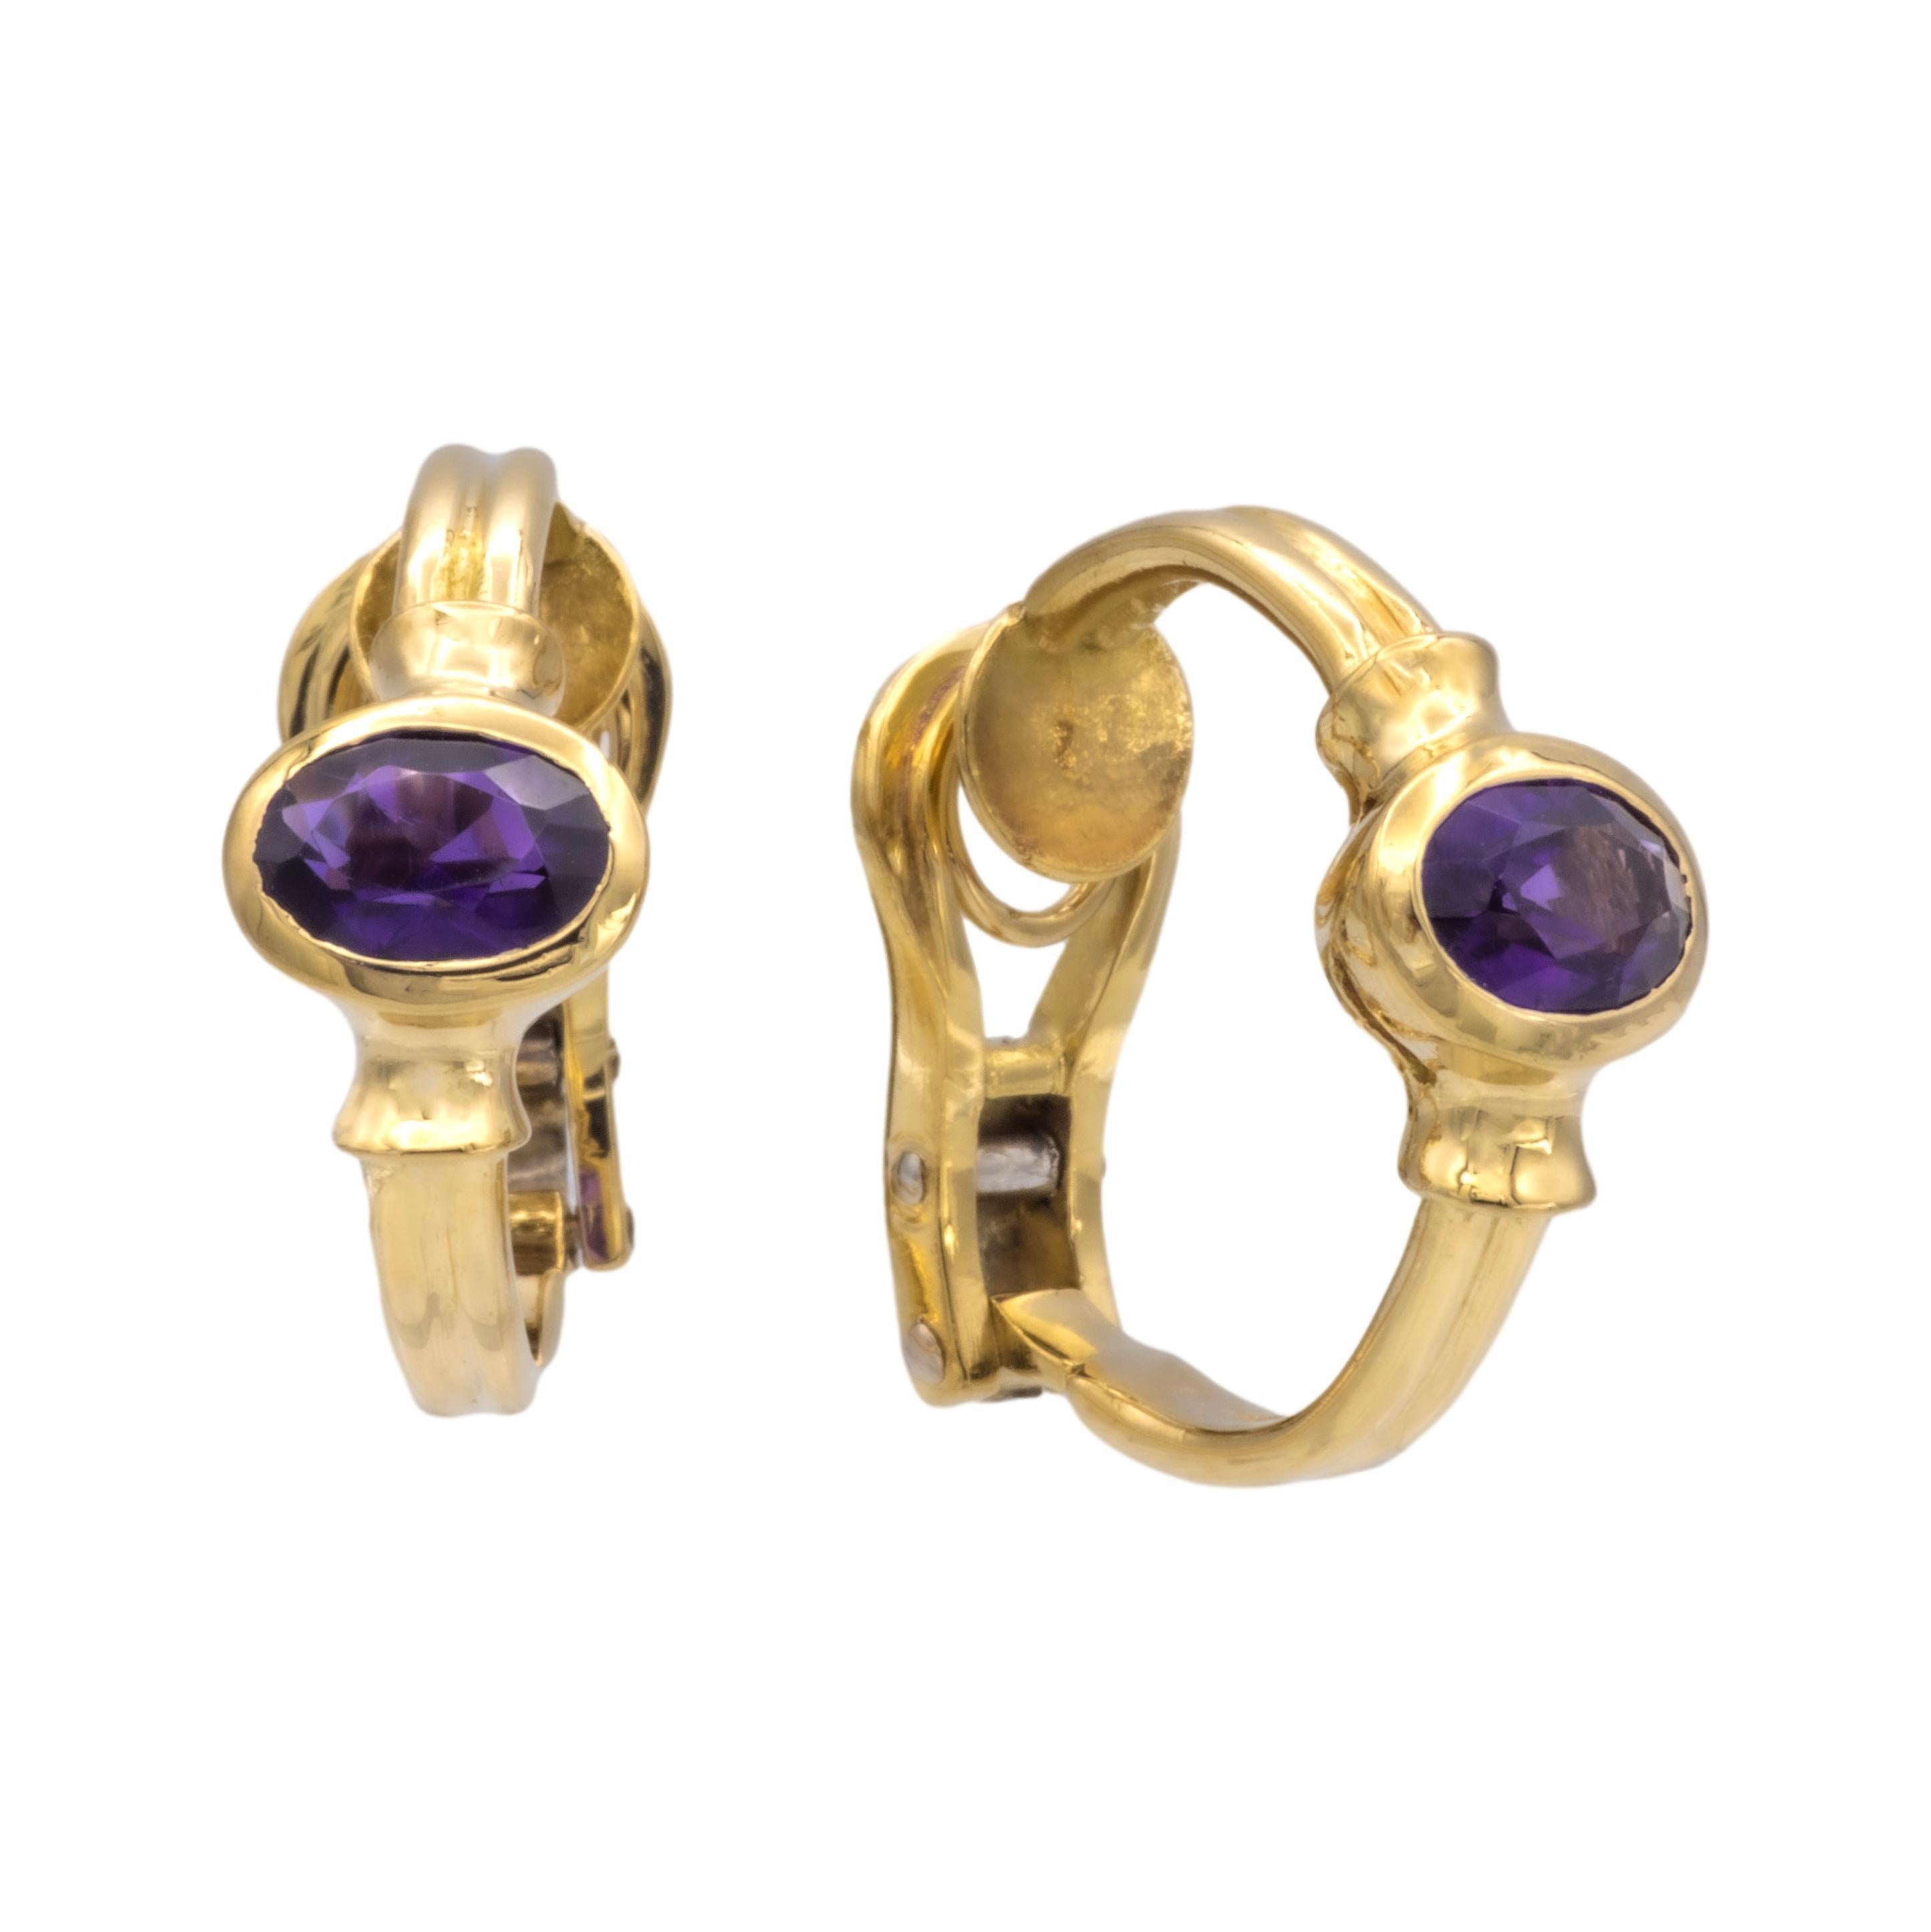 Pair of vintage Cartier huggie earrings finely crafted in 18 karat yellow gold featuring 2 oval center amethysts set horizontal inside bezel settings weighing 0.65 carats approximately each. Earrings measure 0.75